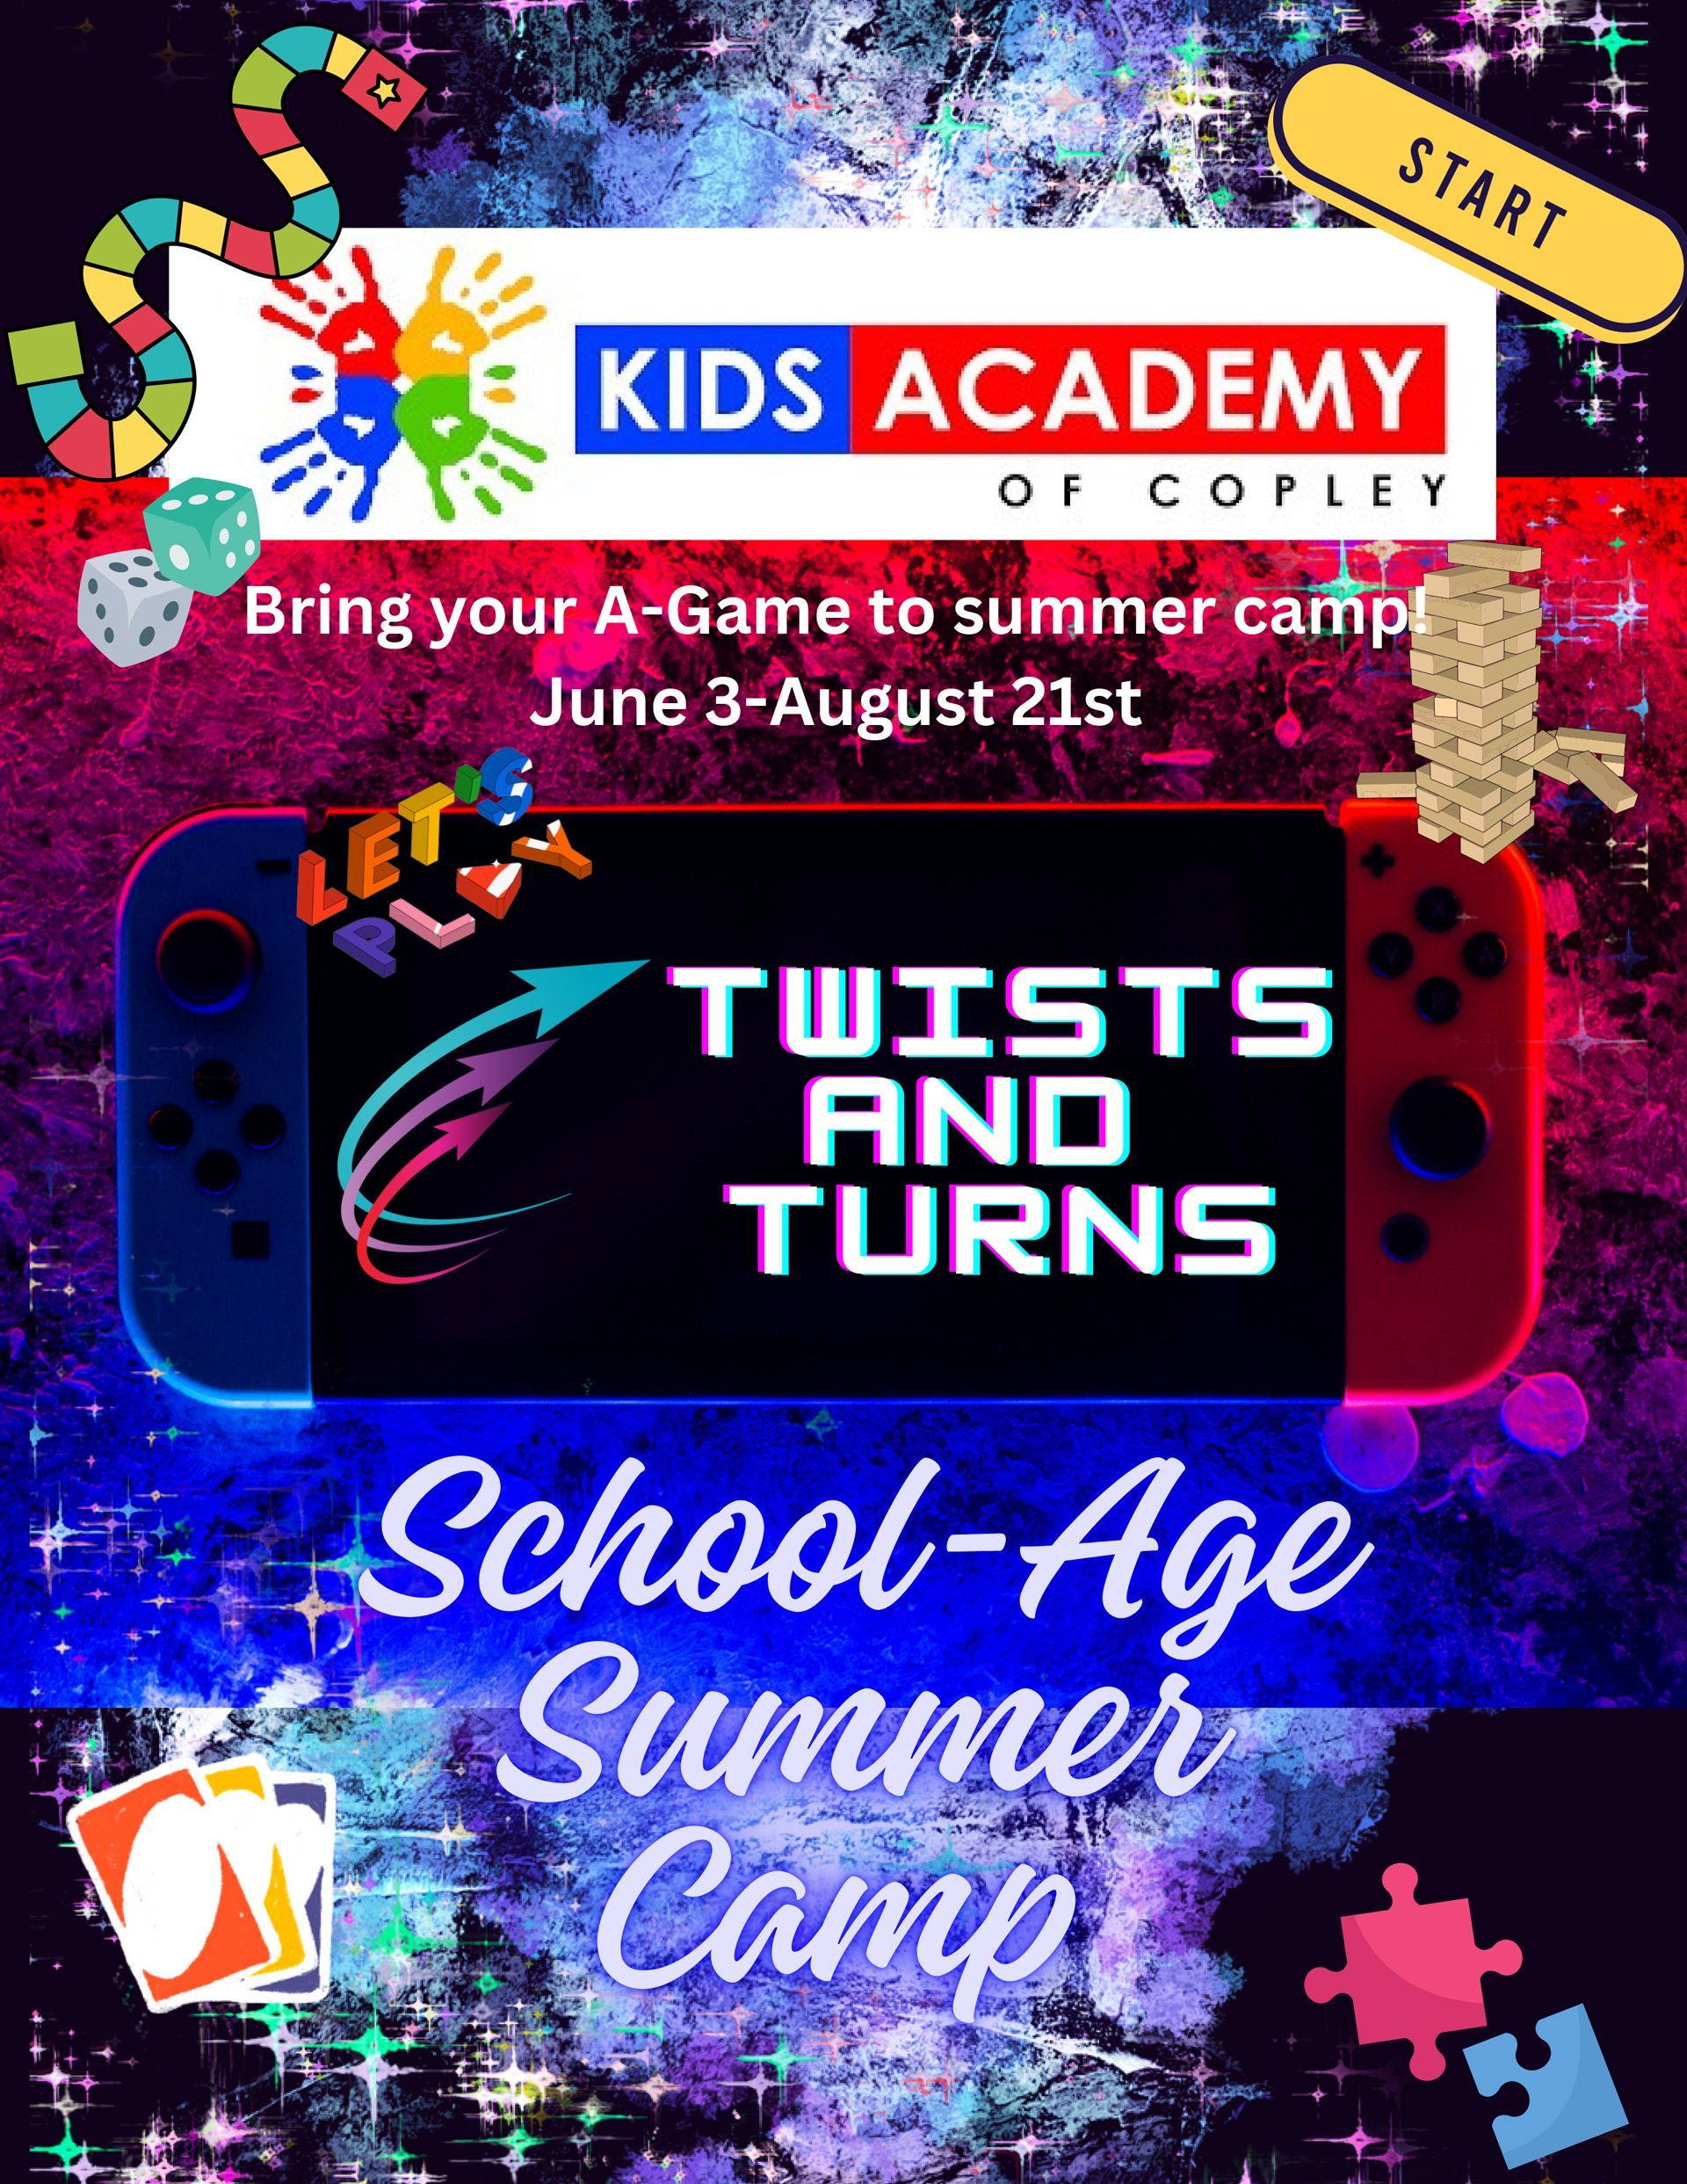 A poster for a kids academy summer camp called twists and turns